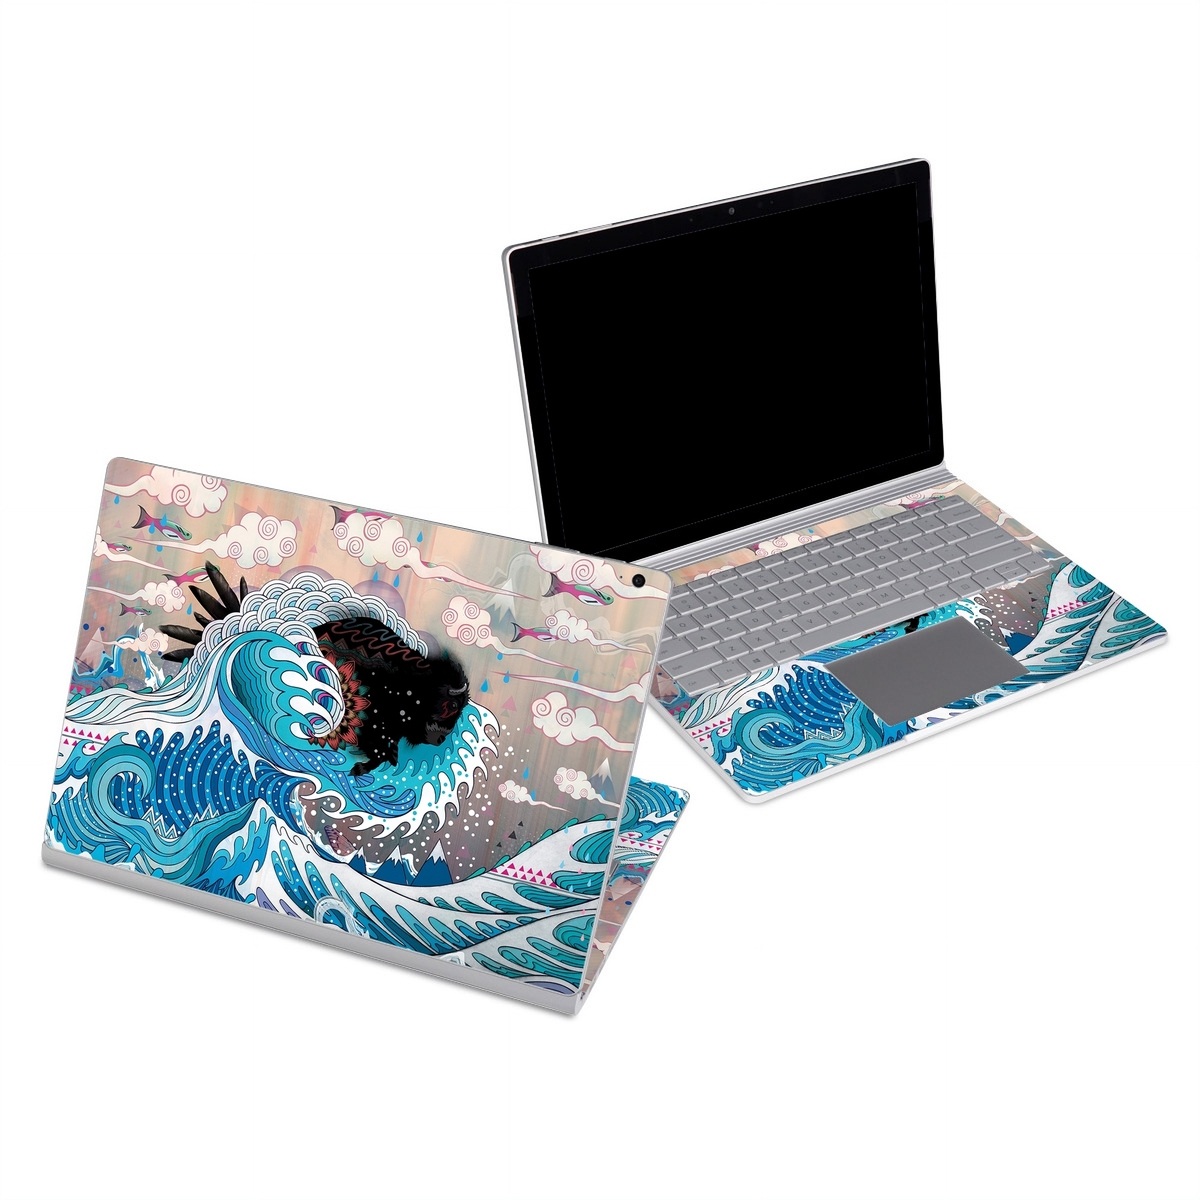 Microsoft Surface Book Series Skin design of Blue, Turquoise, Illustration, Aqua, Graphic design, Pattern, Art, Design, Graphics, Visual arts, with gray, blue, black, pink, white colors